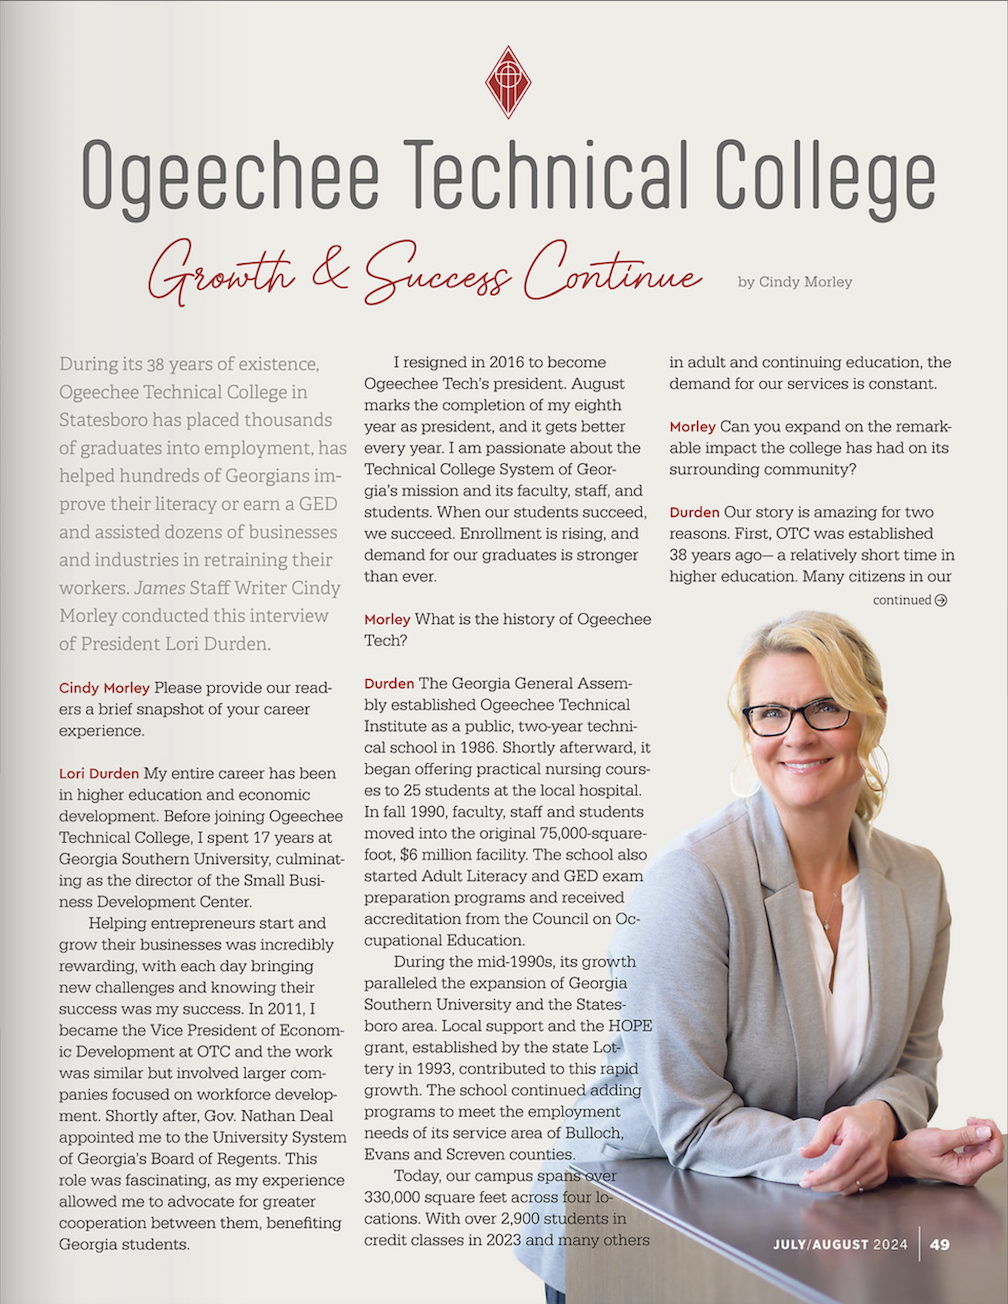 Ogeechee Technical College - Growth & Success Continue